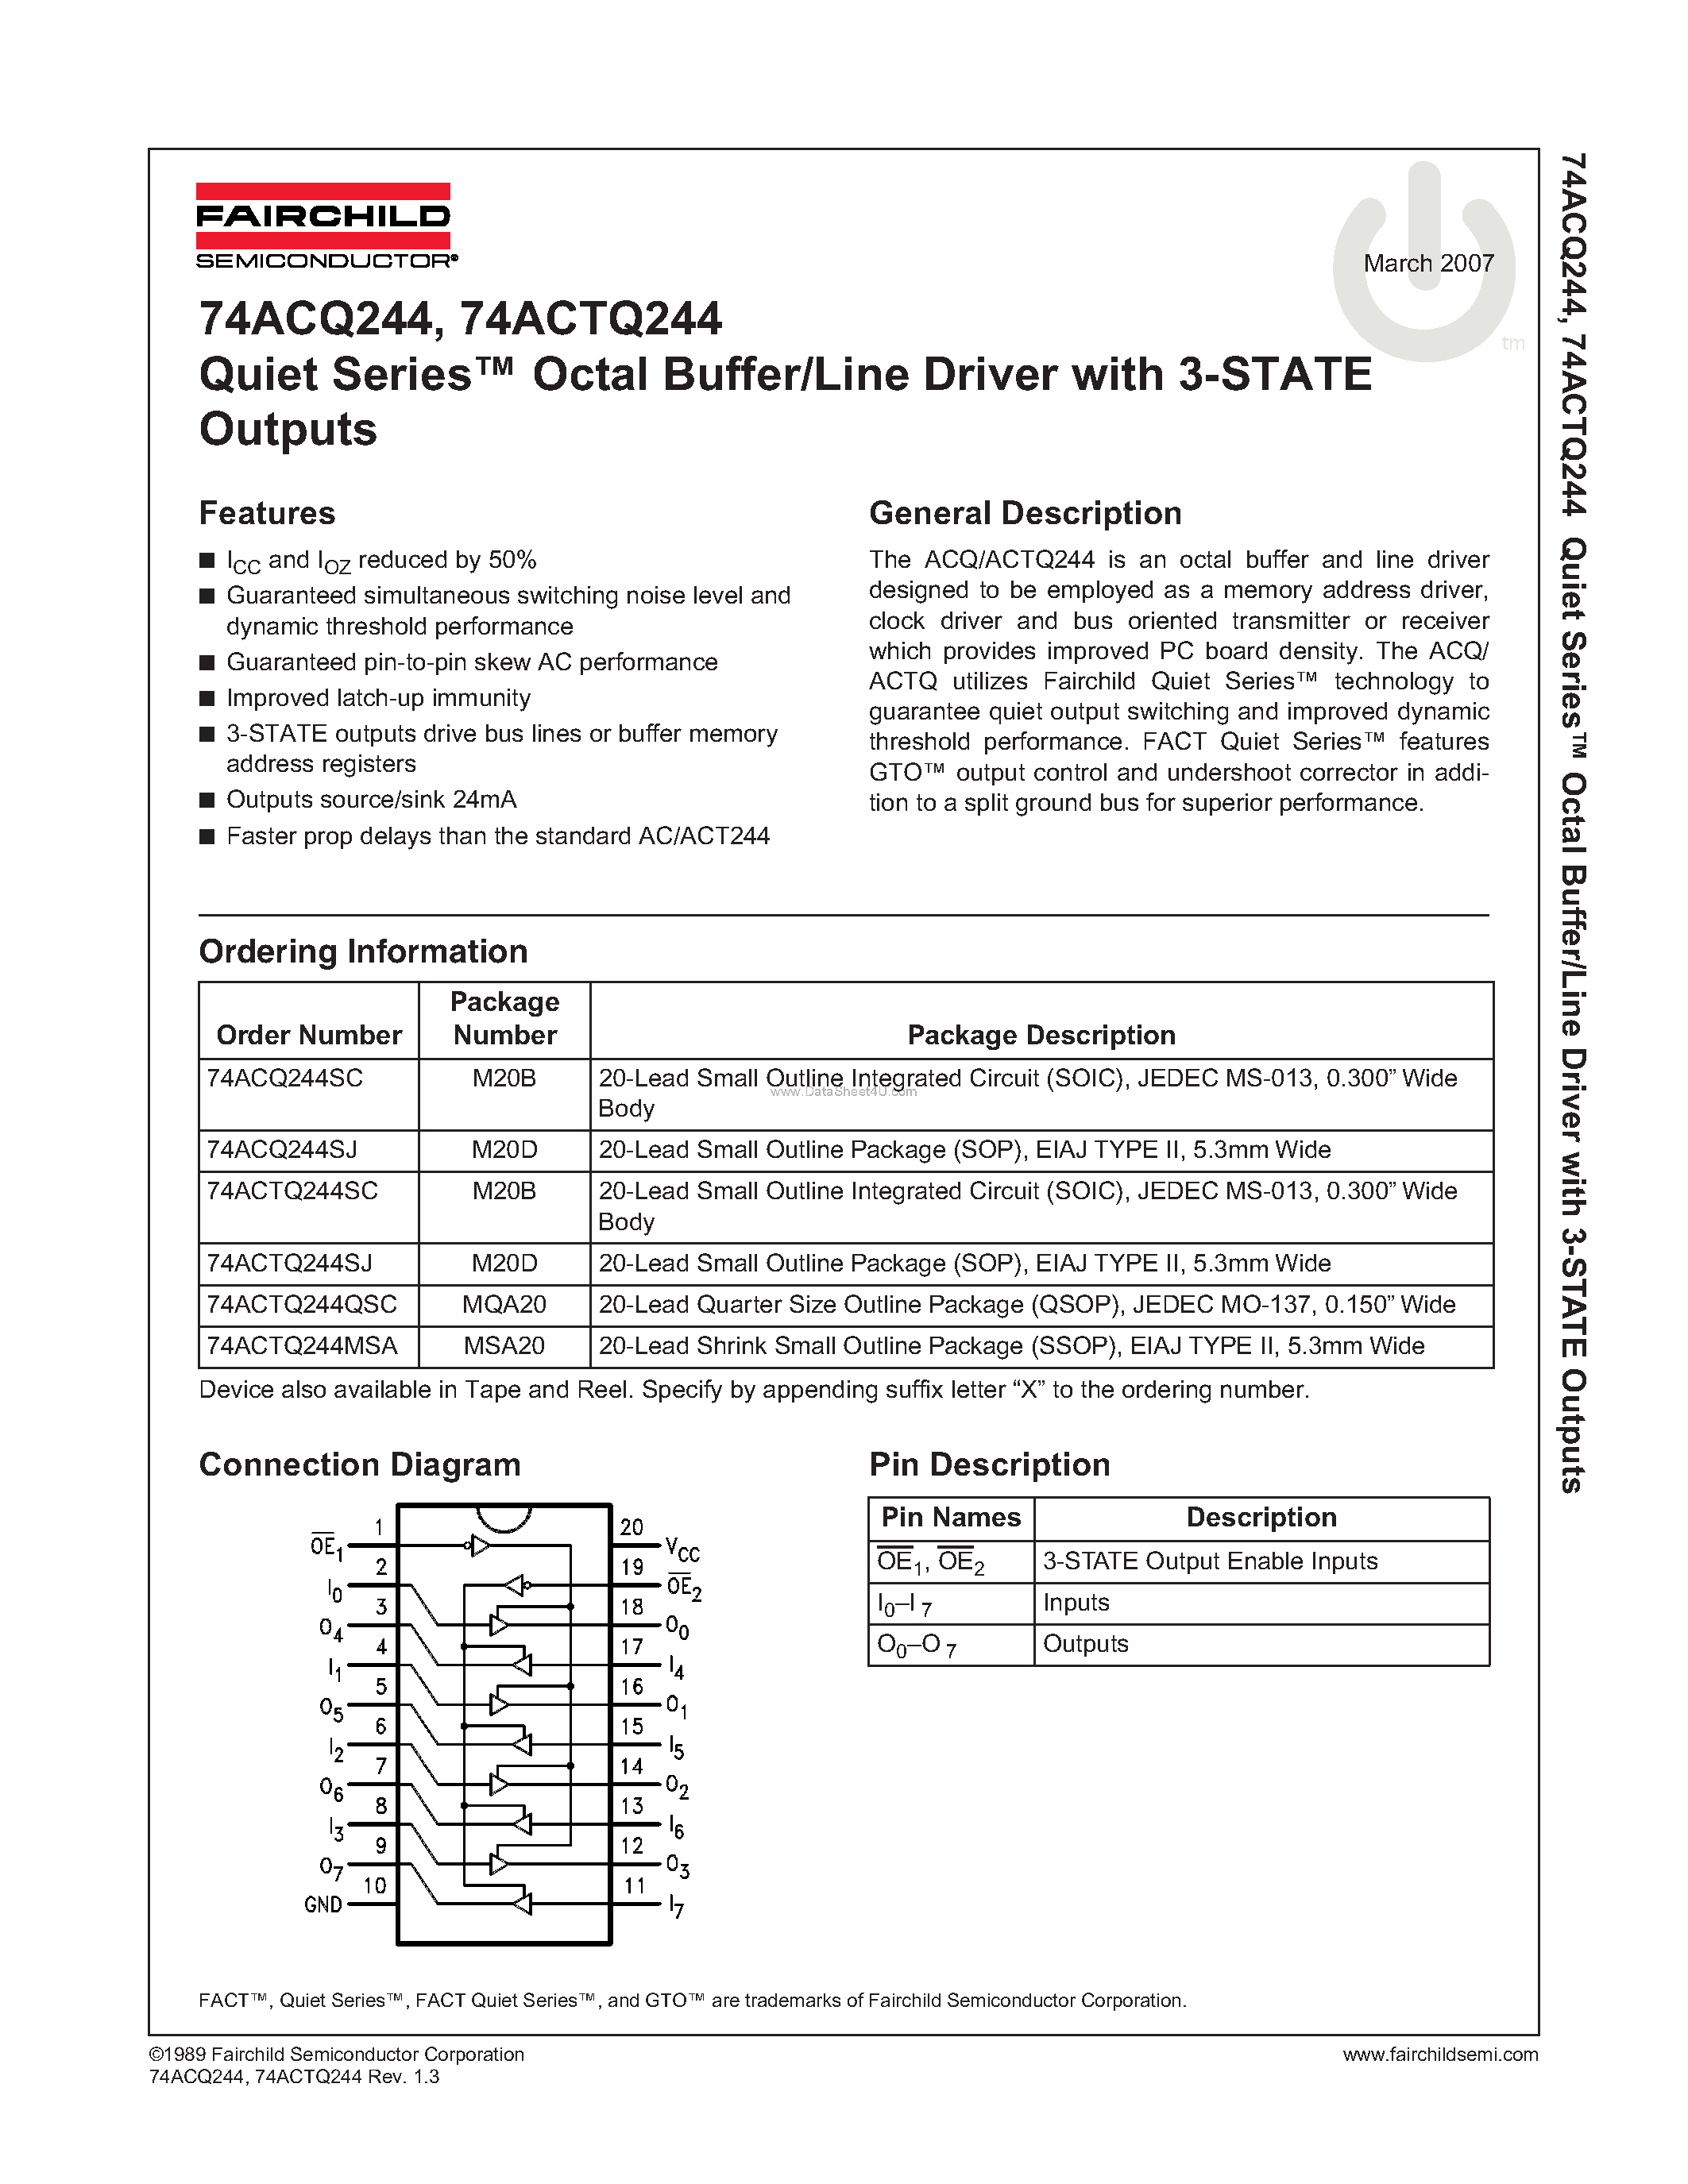 Datasheet 74ACQ244 - Quiet Series. Octal Buffer/Line Driver with 3-STATE Outputs page 1